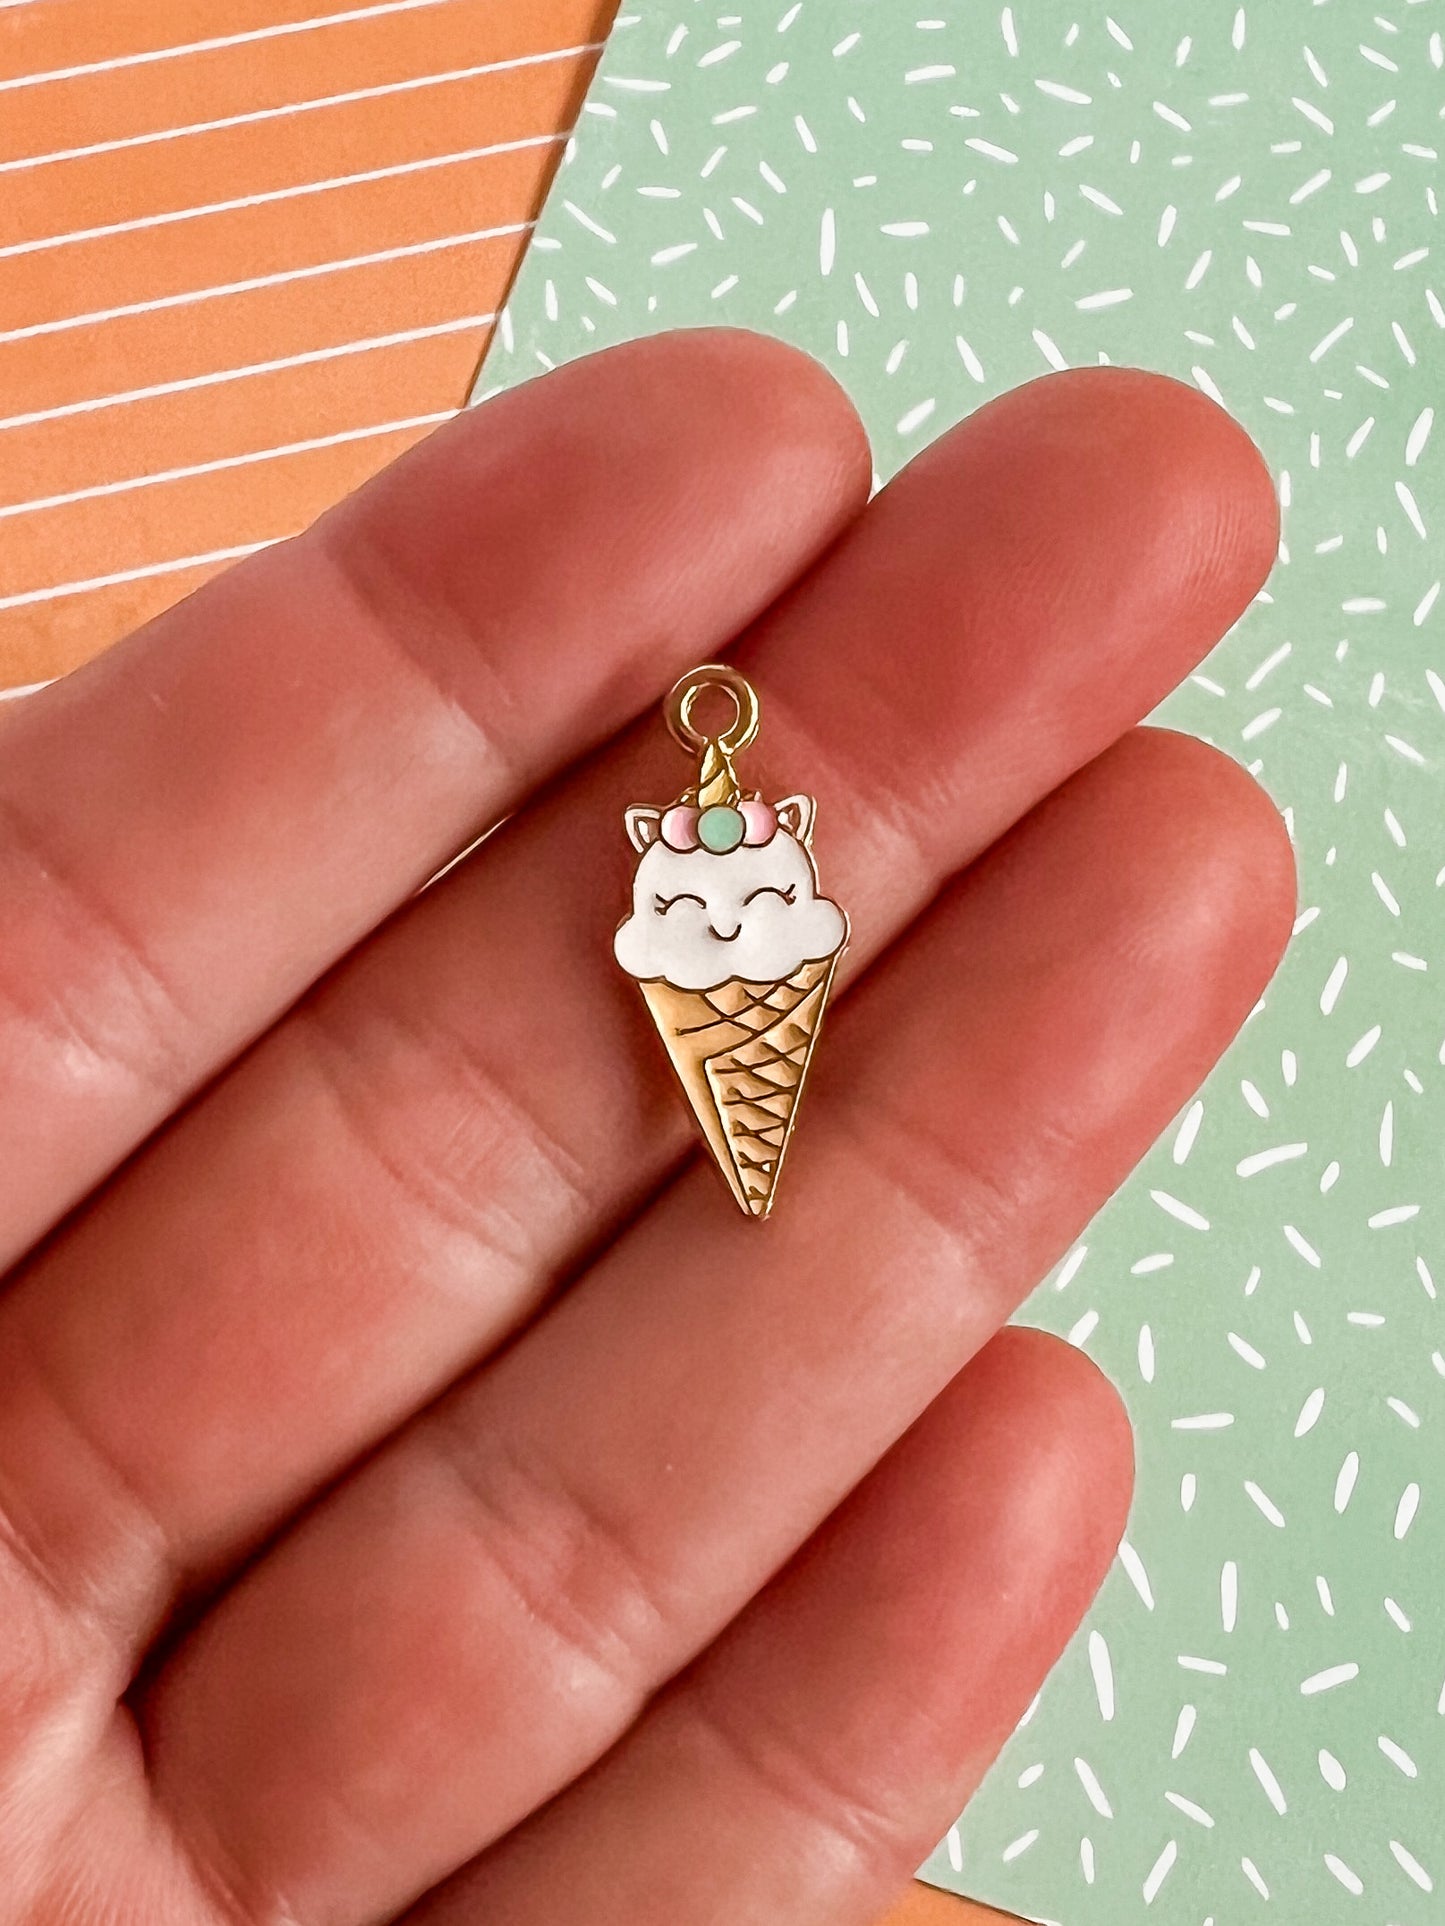 Kitty Cone Necklace and Earrings